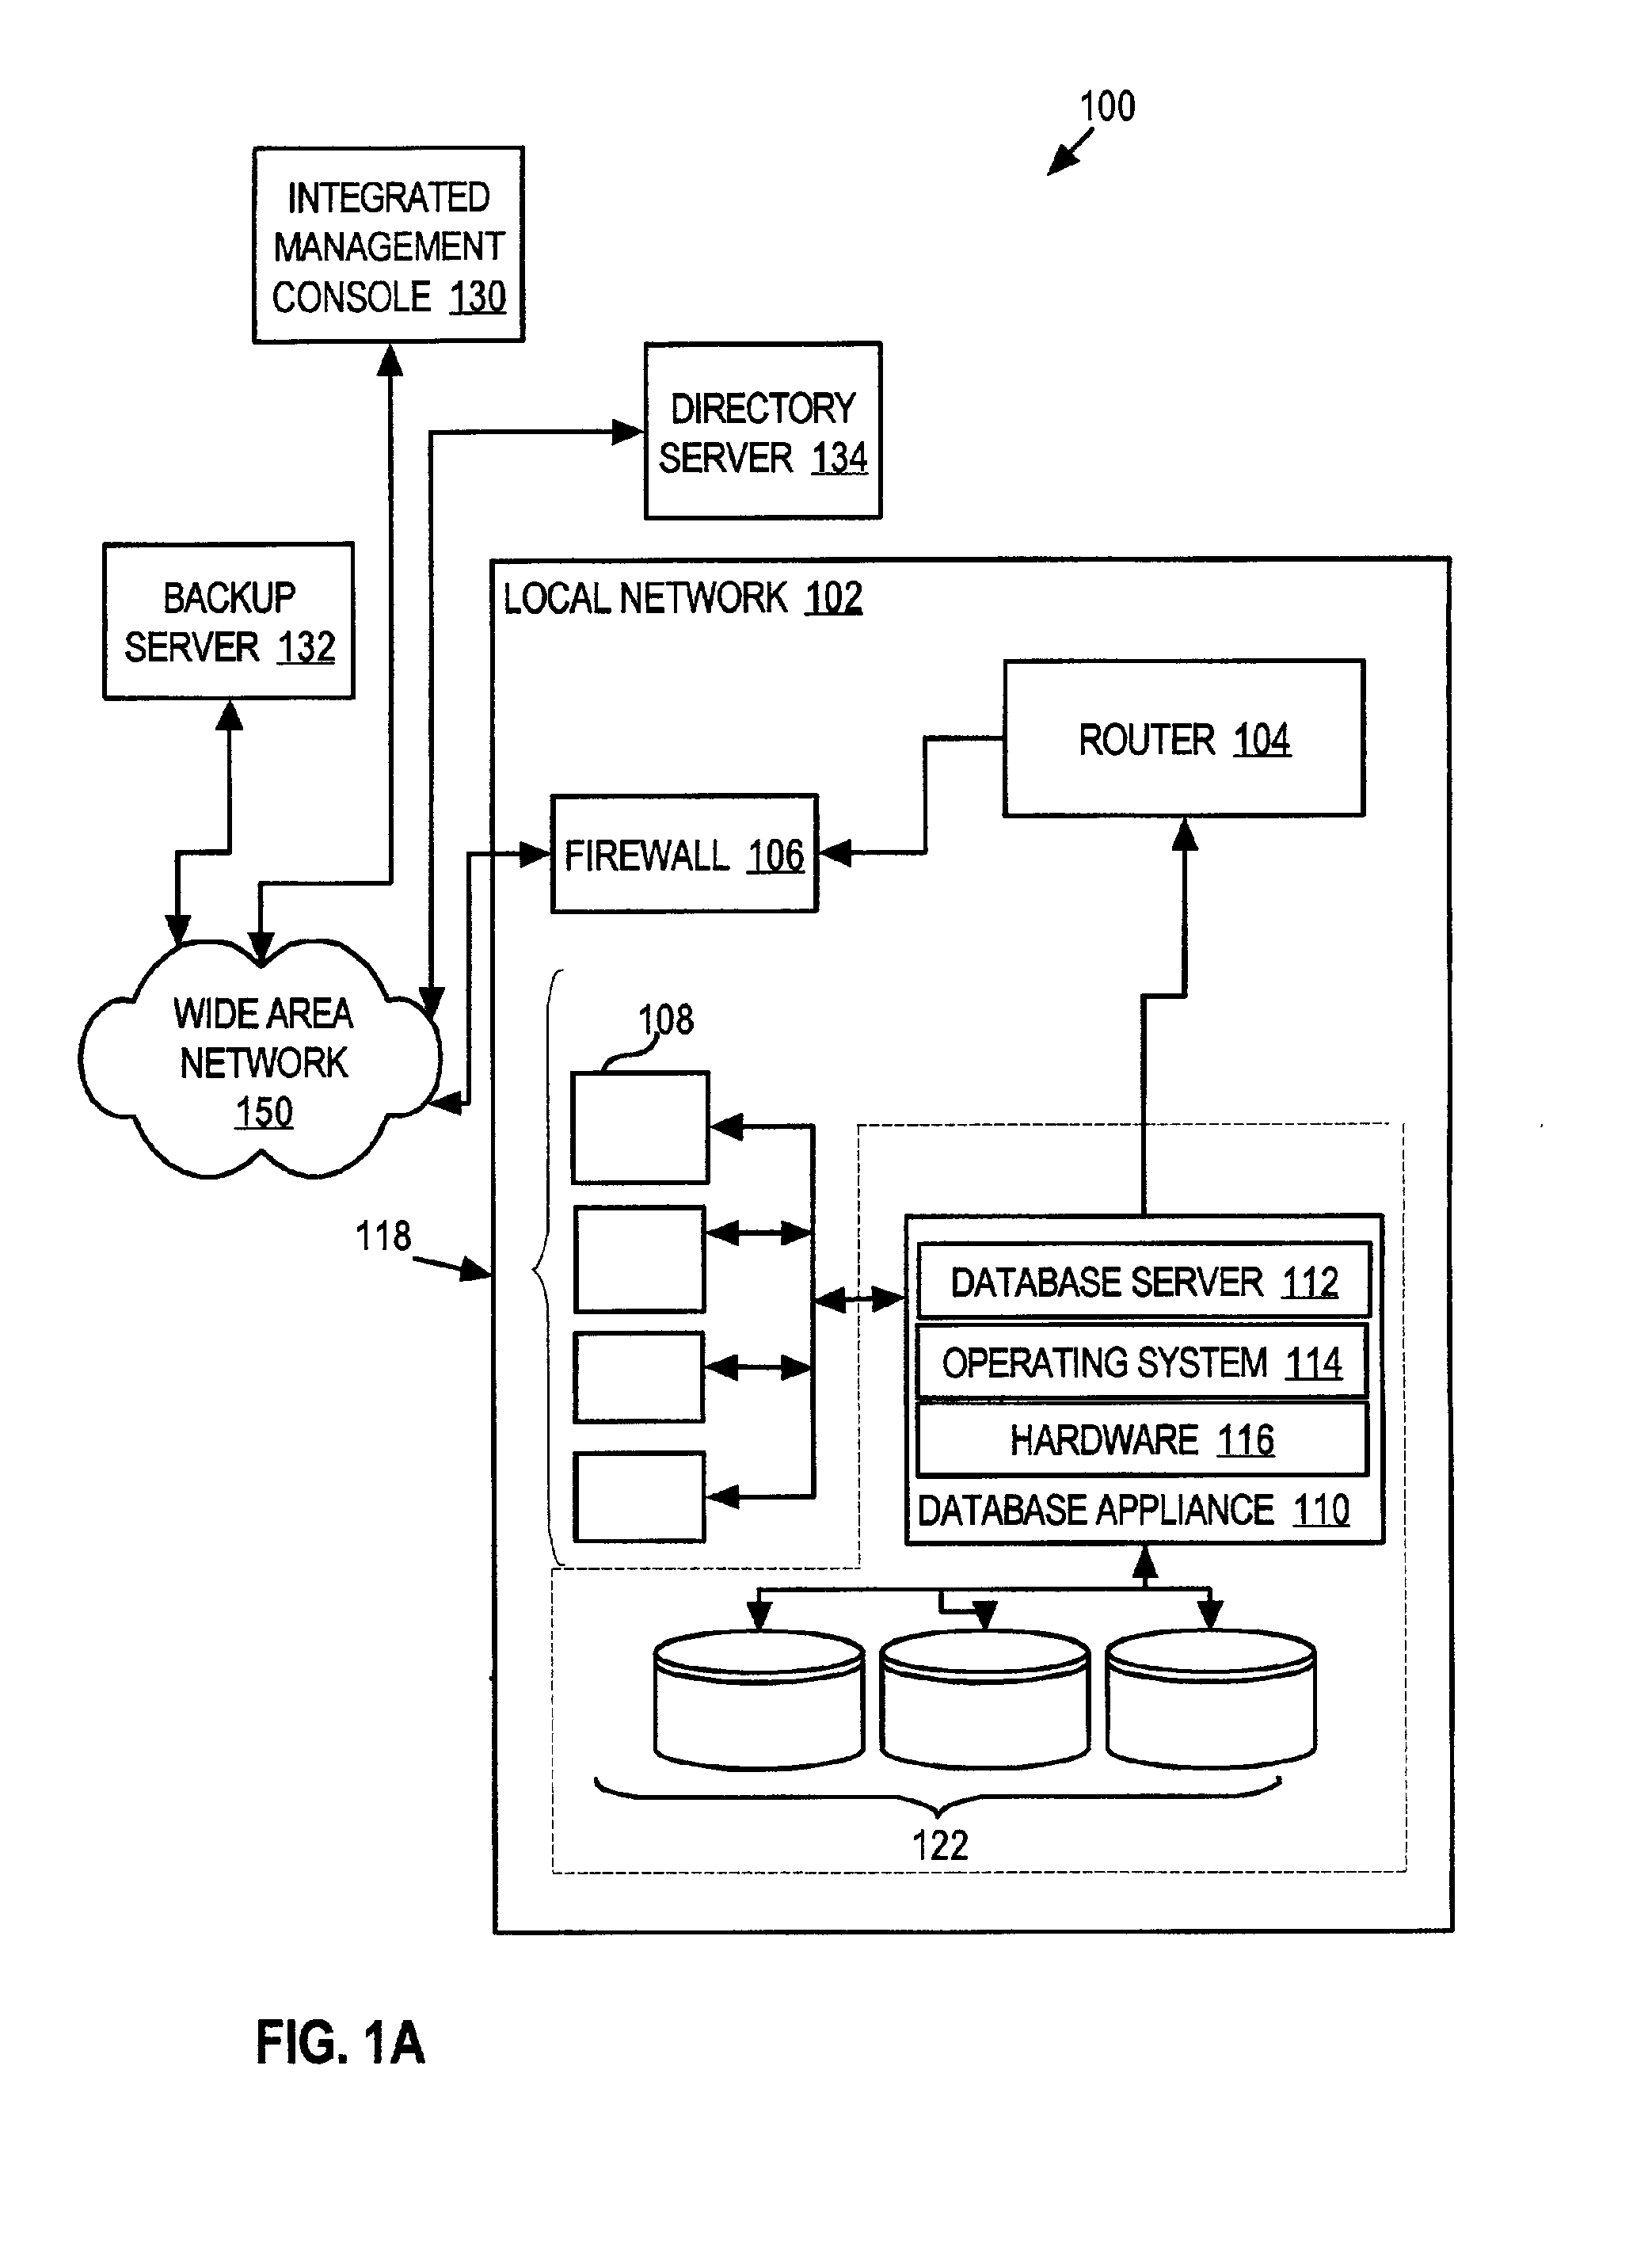 Techniques for managing configuration for a system of devices arranged in a network